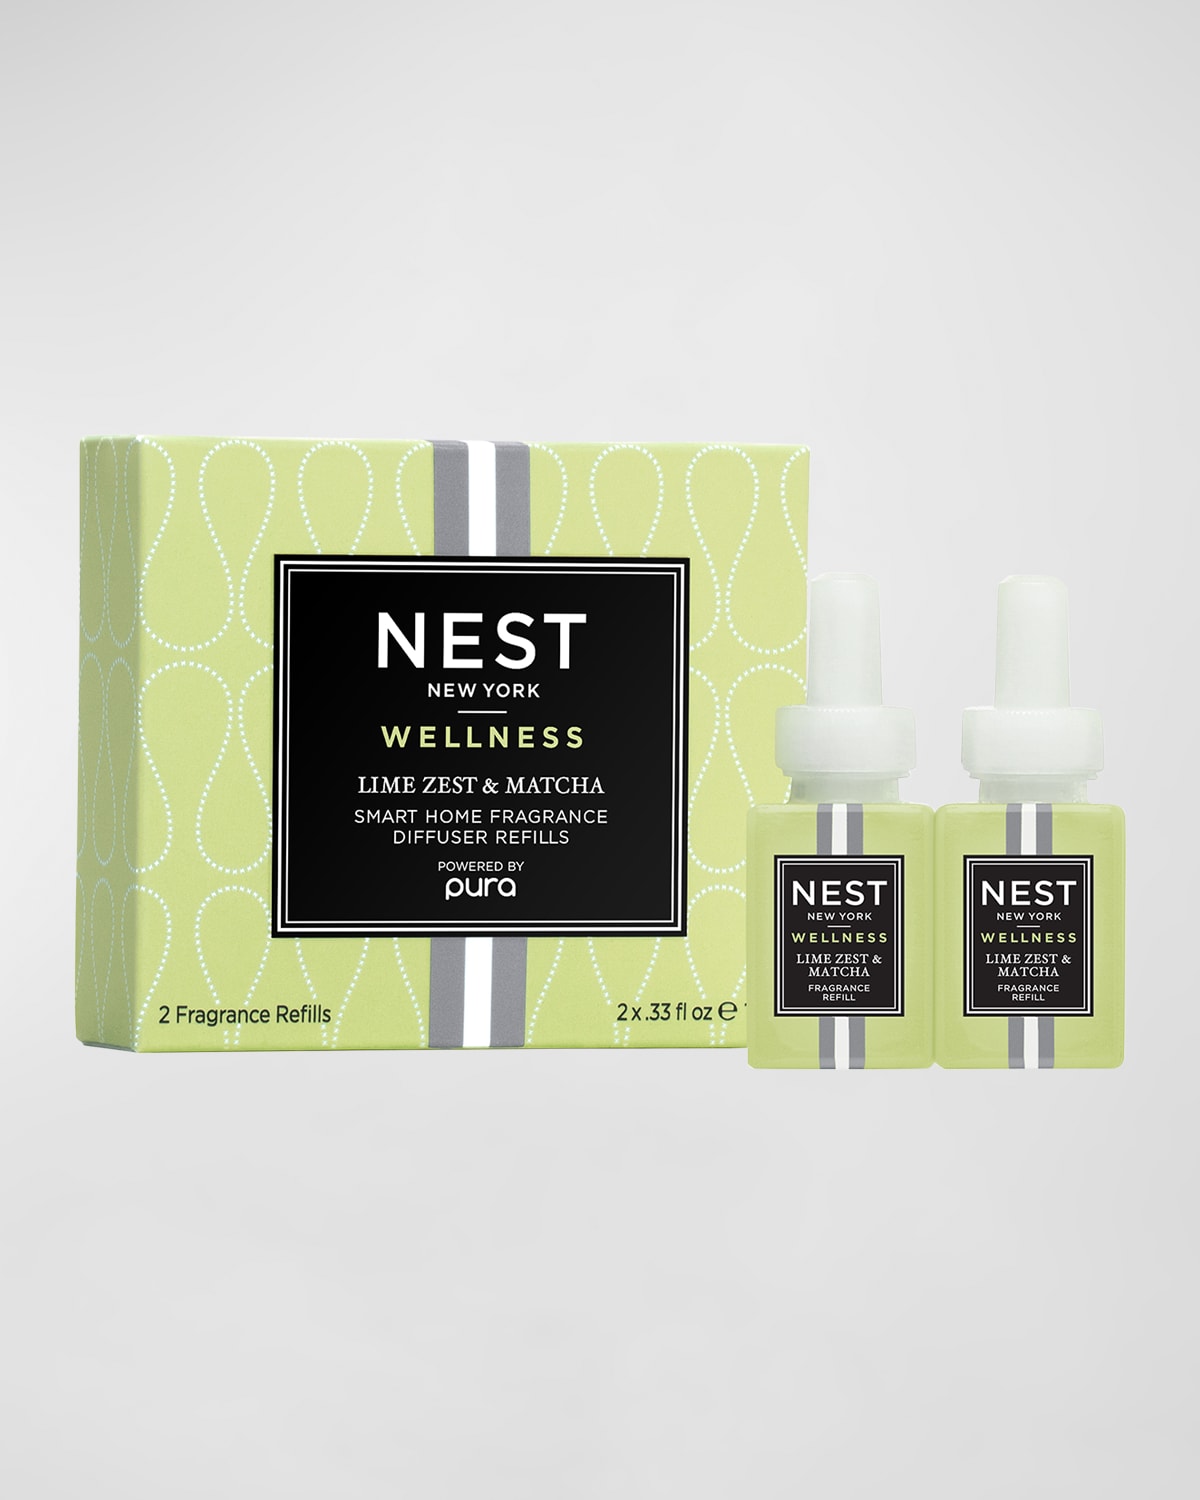 NEST NEW YORK X PURA LIME ZEST AND MATCHA SMART HOME FRAGRANCE DIFFUSER REFILL DUO, 2 X 0.33 OZ.